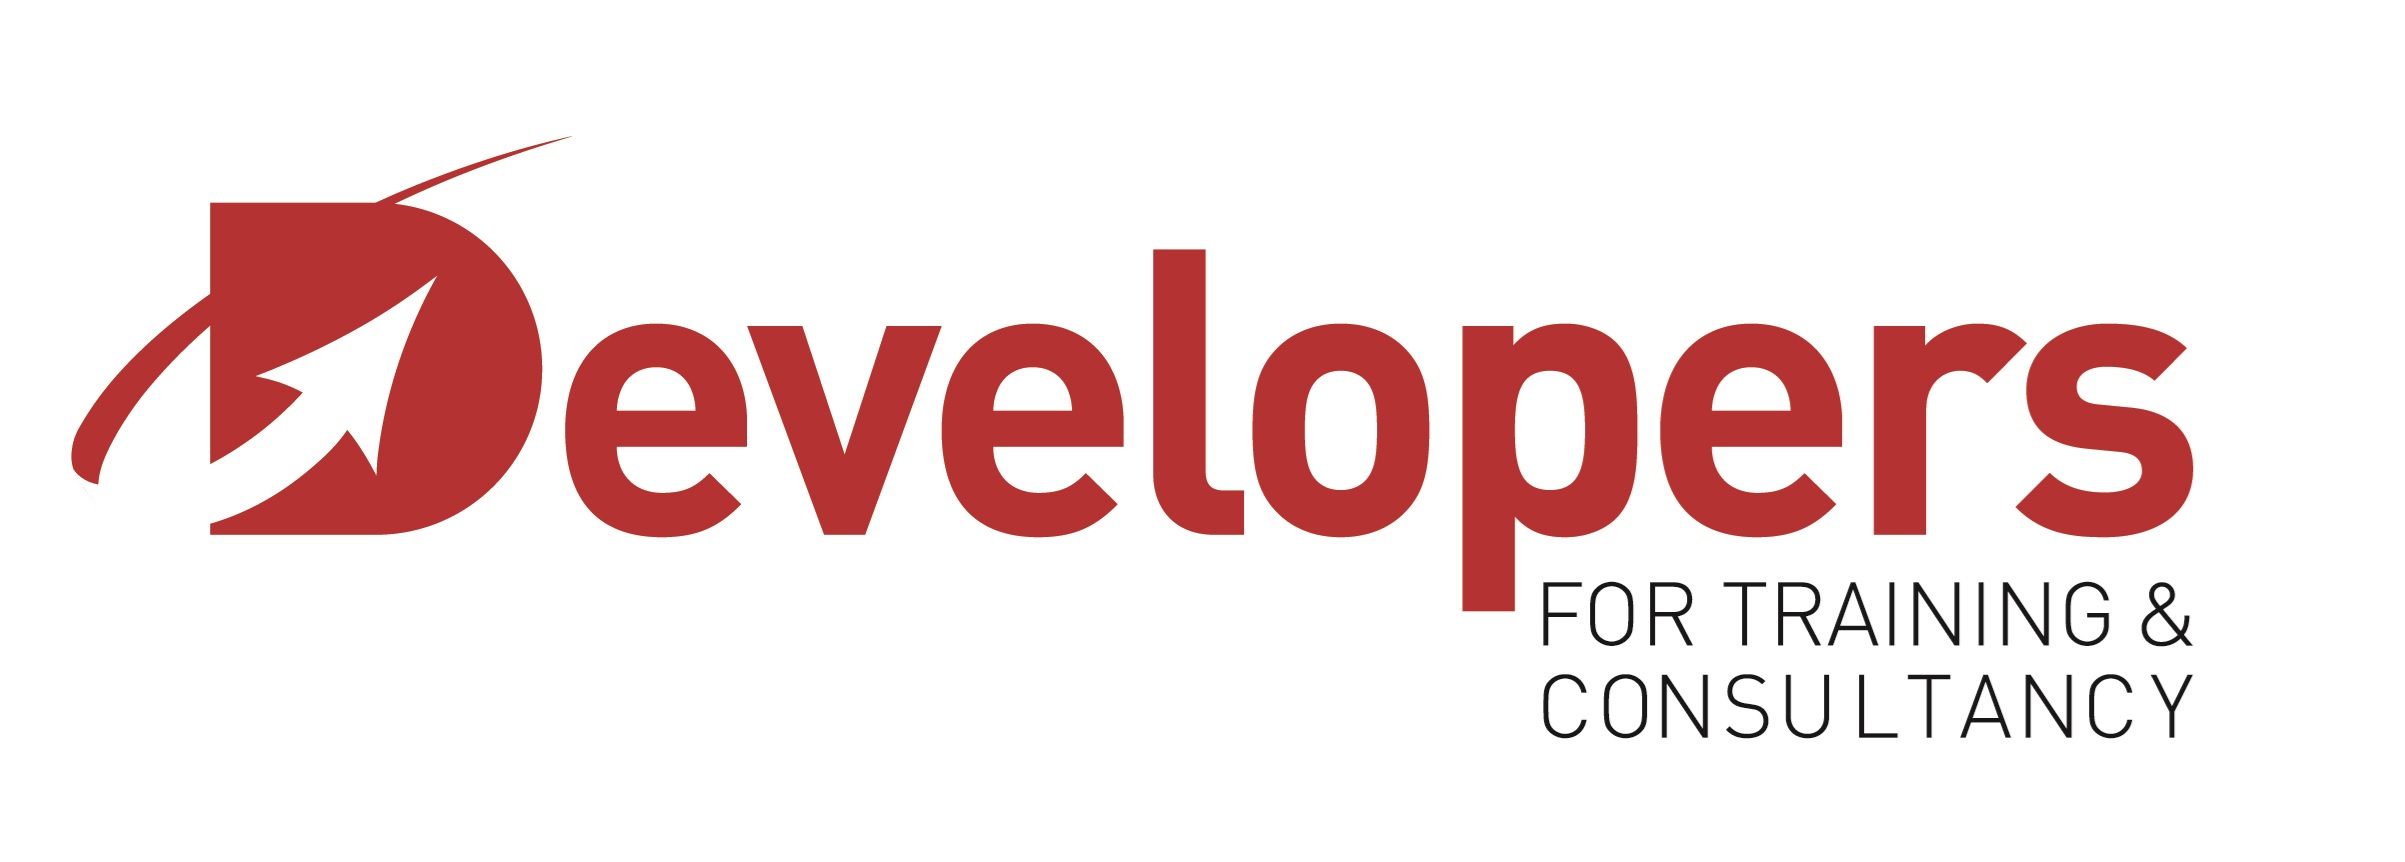 Developers for Training and Consultancy 